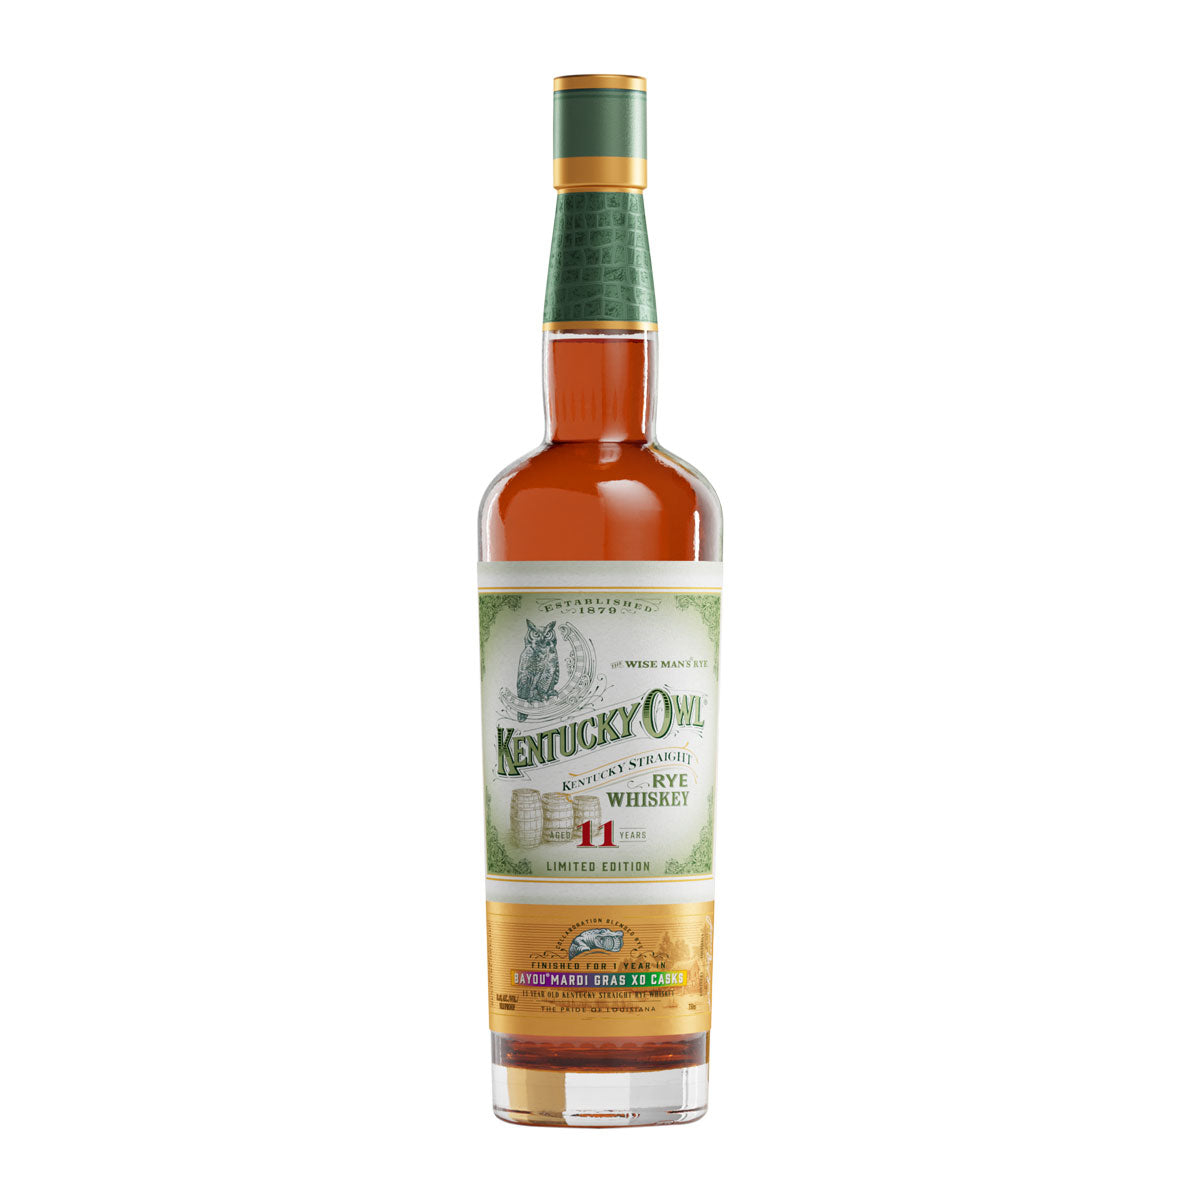 TAG Liquor Stores BC - Kentucky Owl Mardi Gras XO Cask Limited Edition 11 Year Old Rye Whiskey 750ml